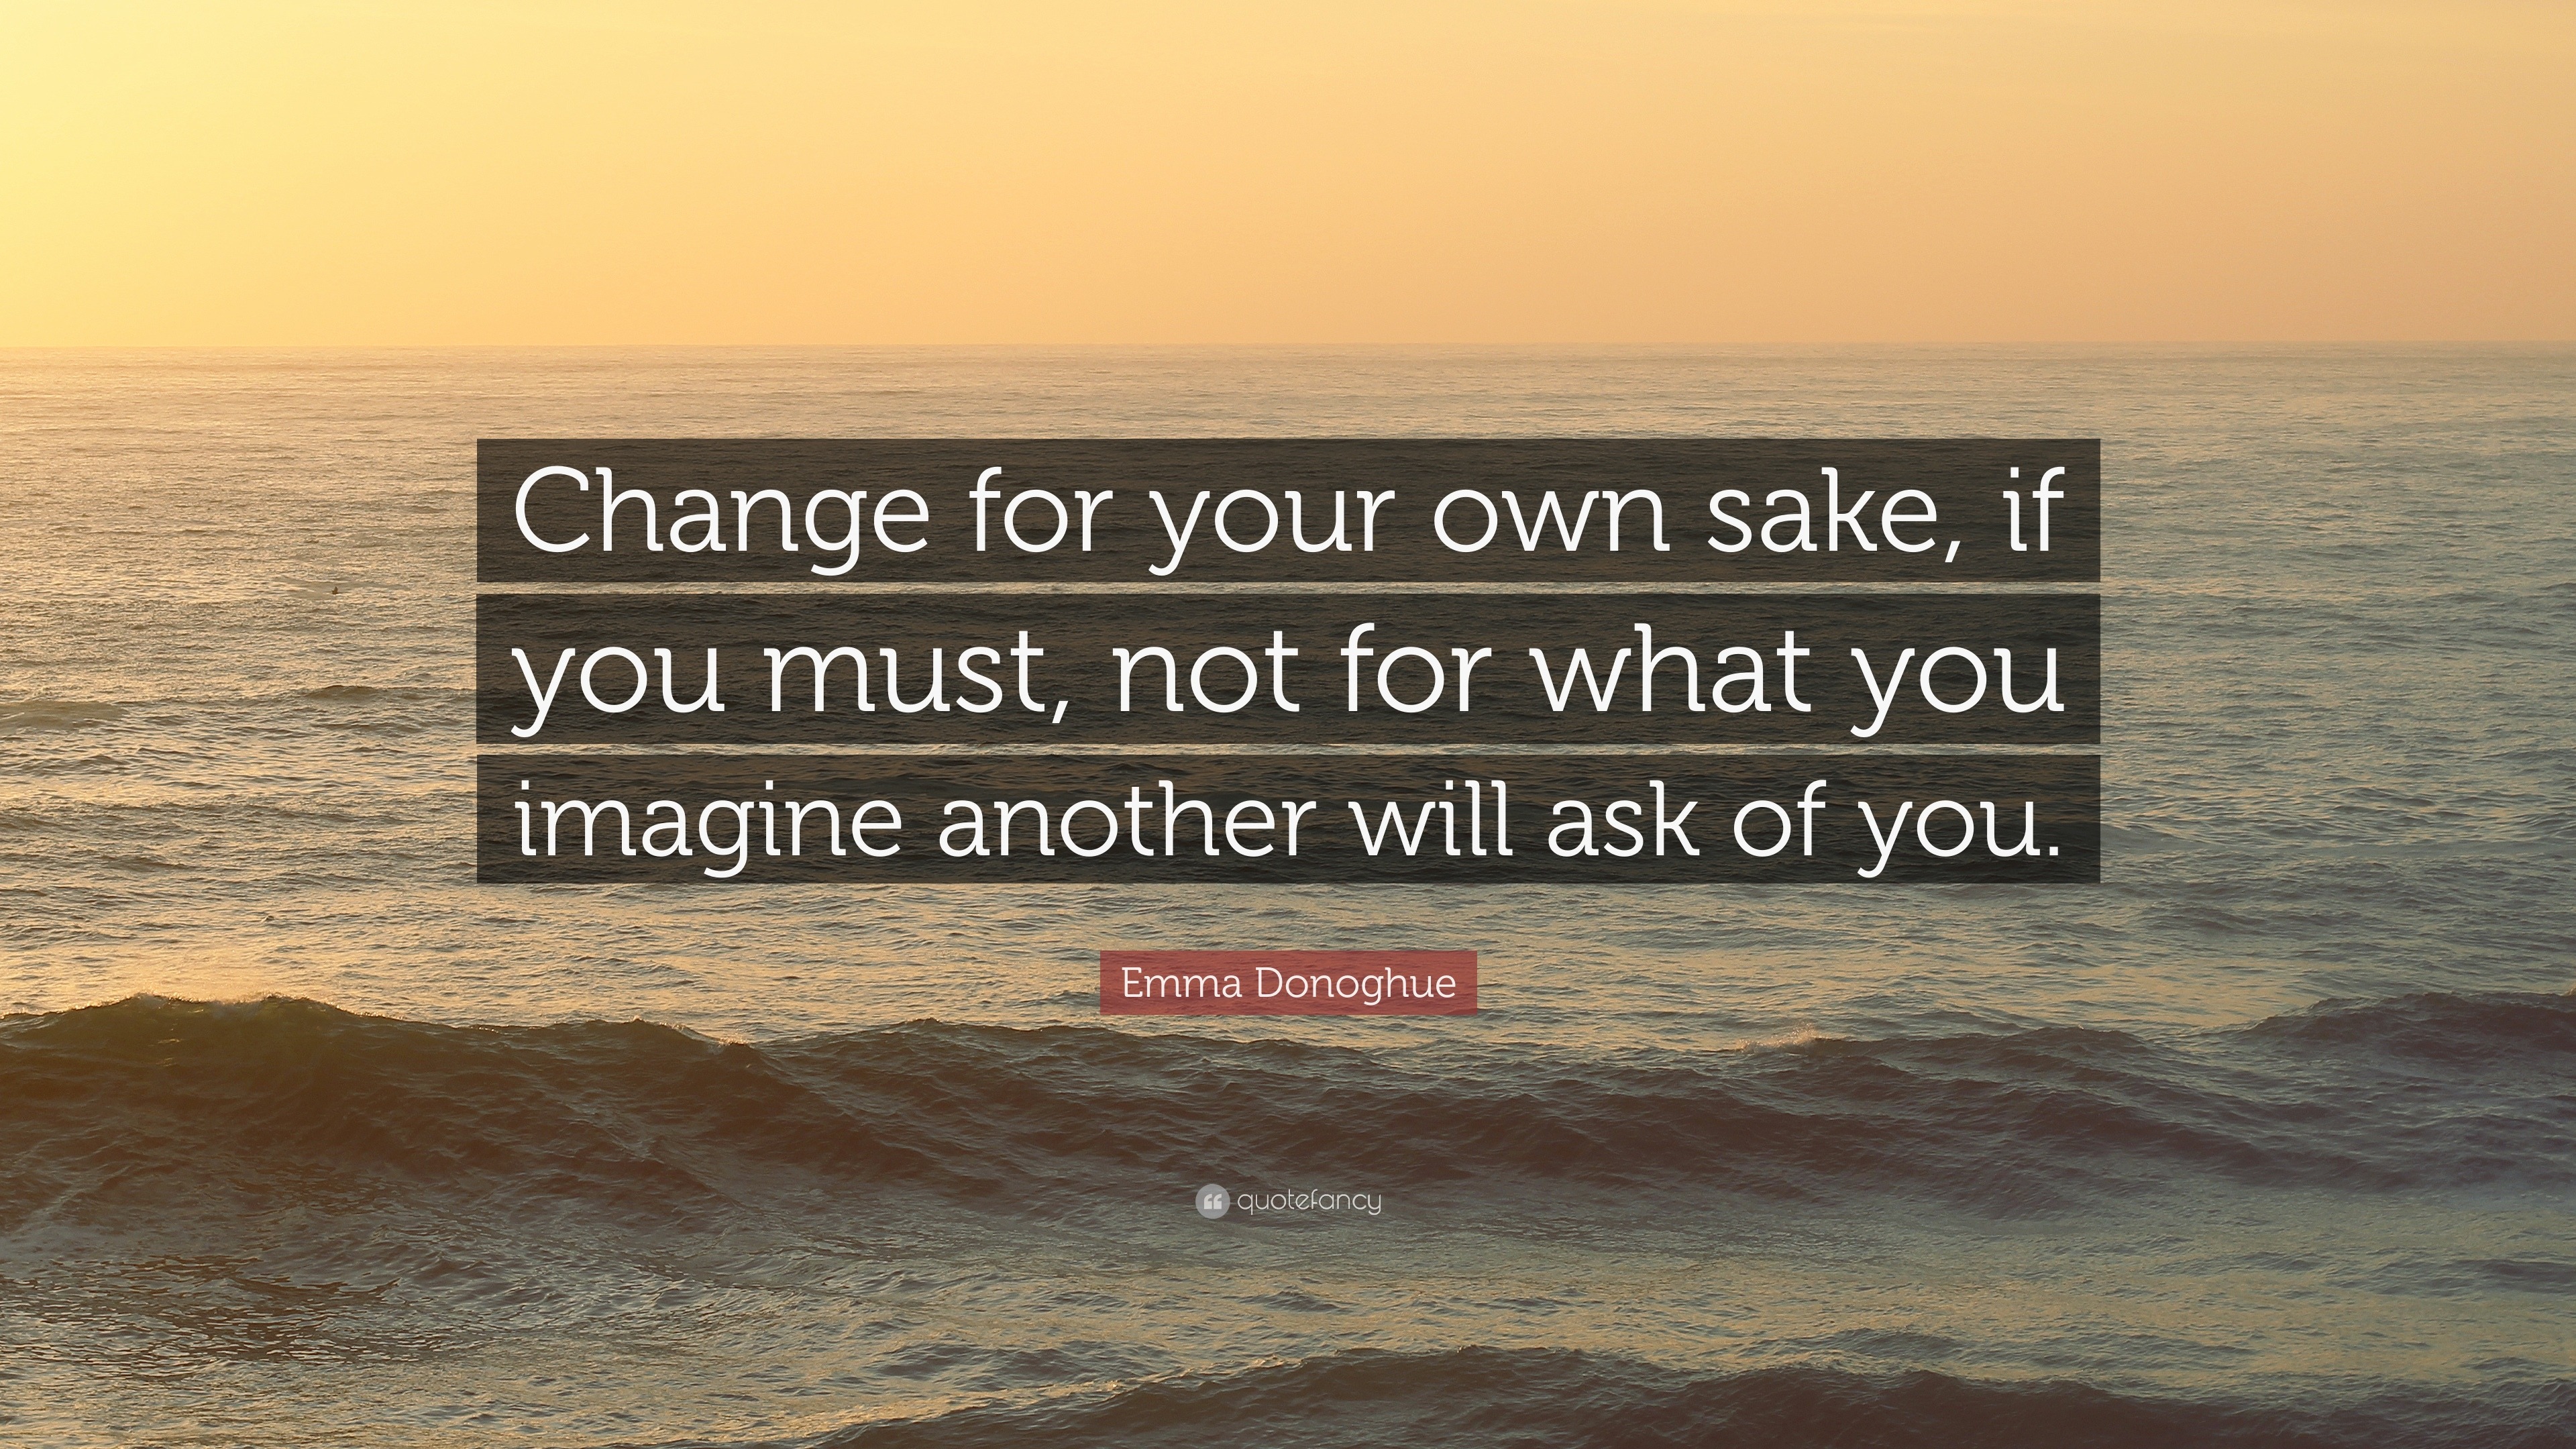 Emma Donoghue Quote: "Change for your own sake, if you must, not for what you imagine another ...